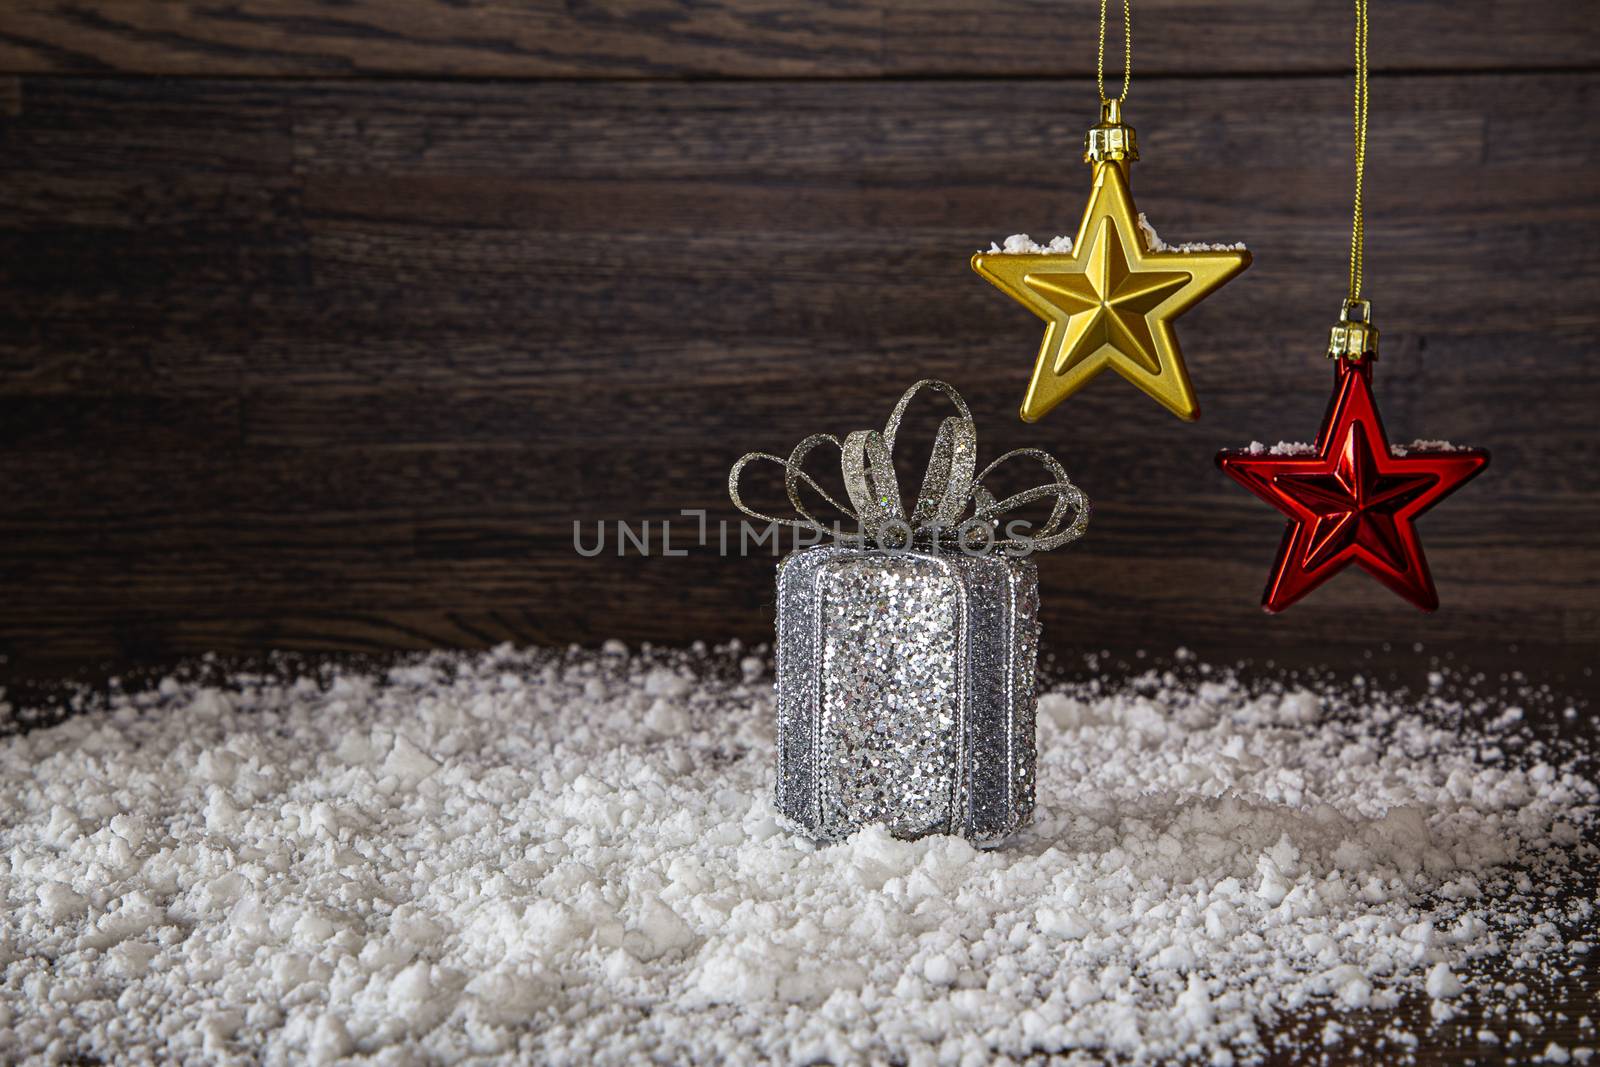 Silver present, in the snow, with gold and red star hanging over head on the dark wood background